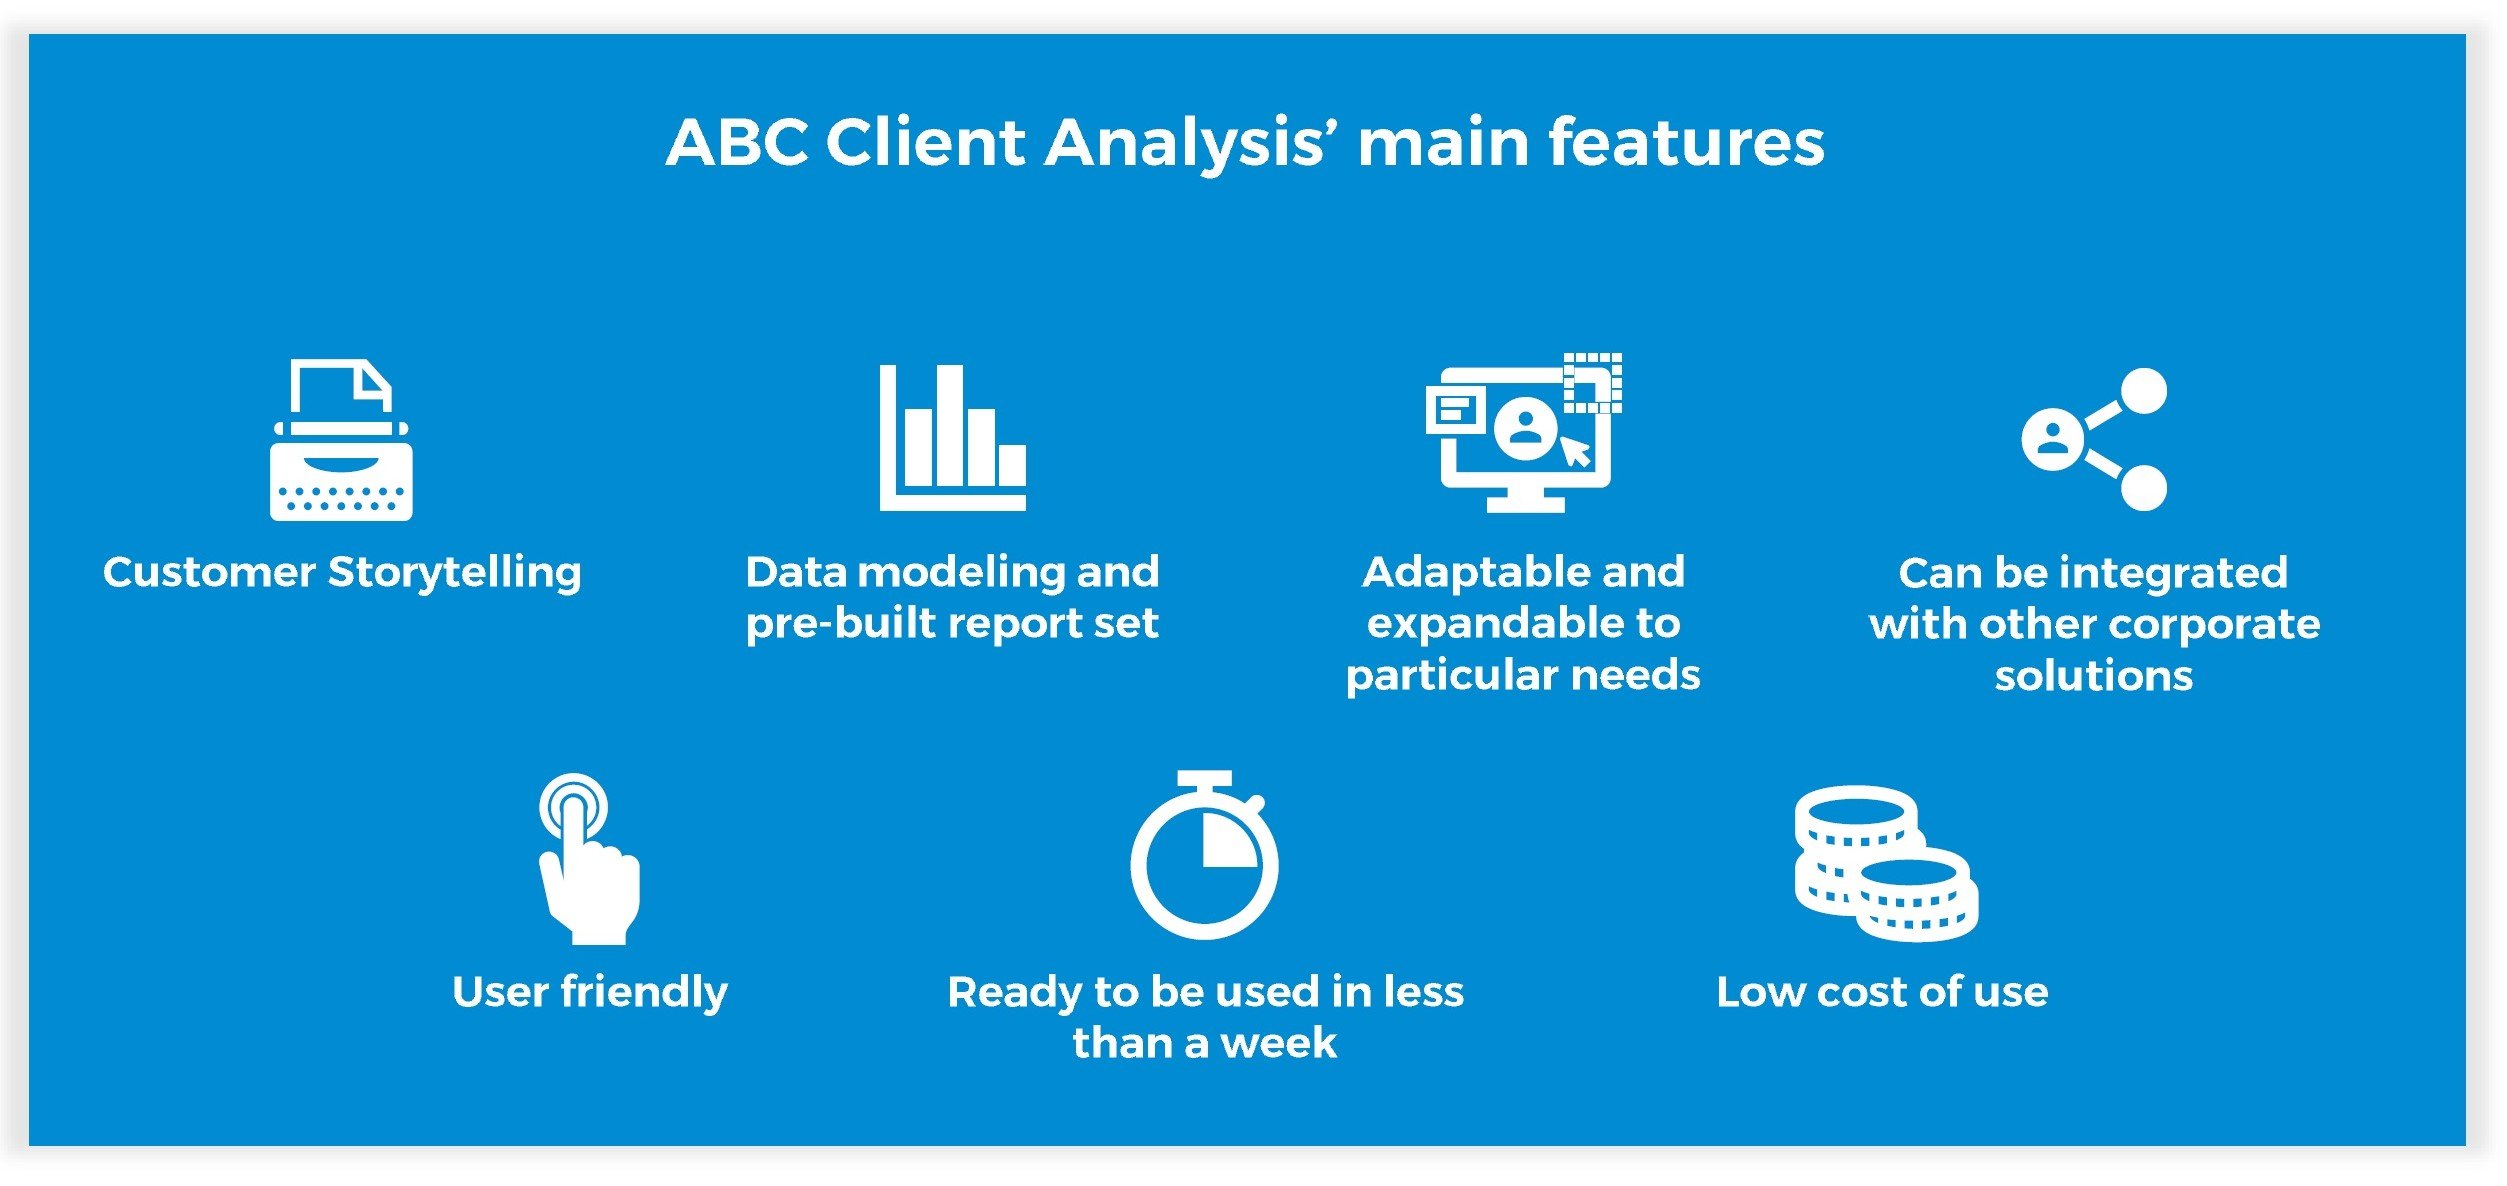 abc-client-analysis-main-features